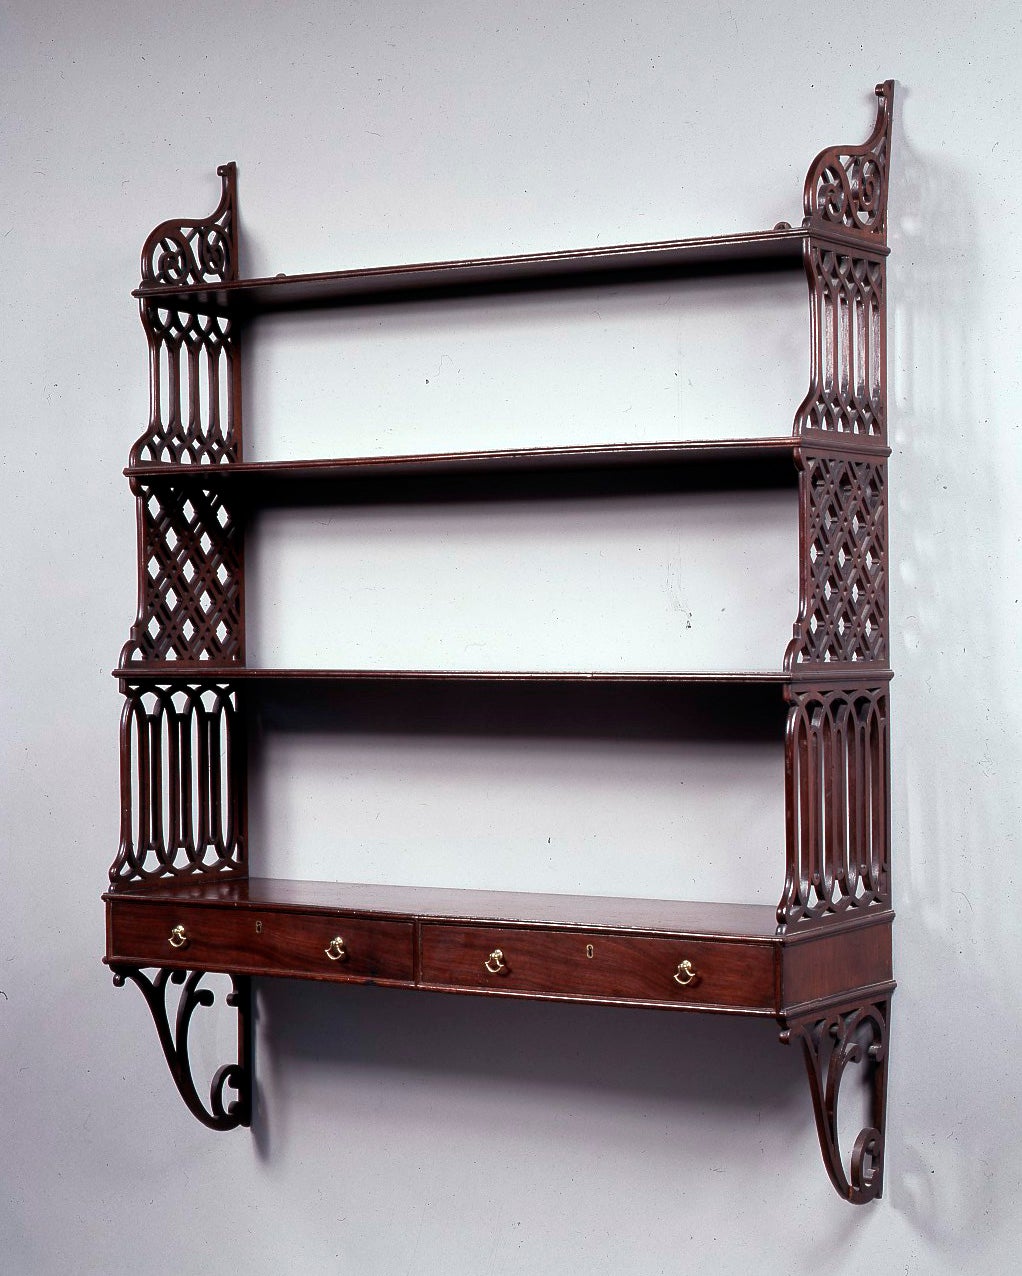 George-II-Mahogany-Hanging-Shelves-in-the-Manner-of-Thomas-Chippendale